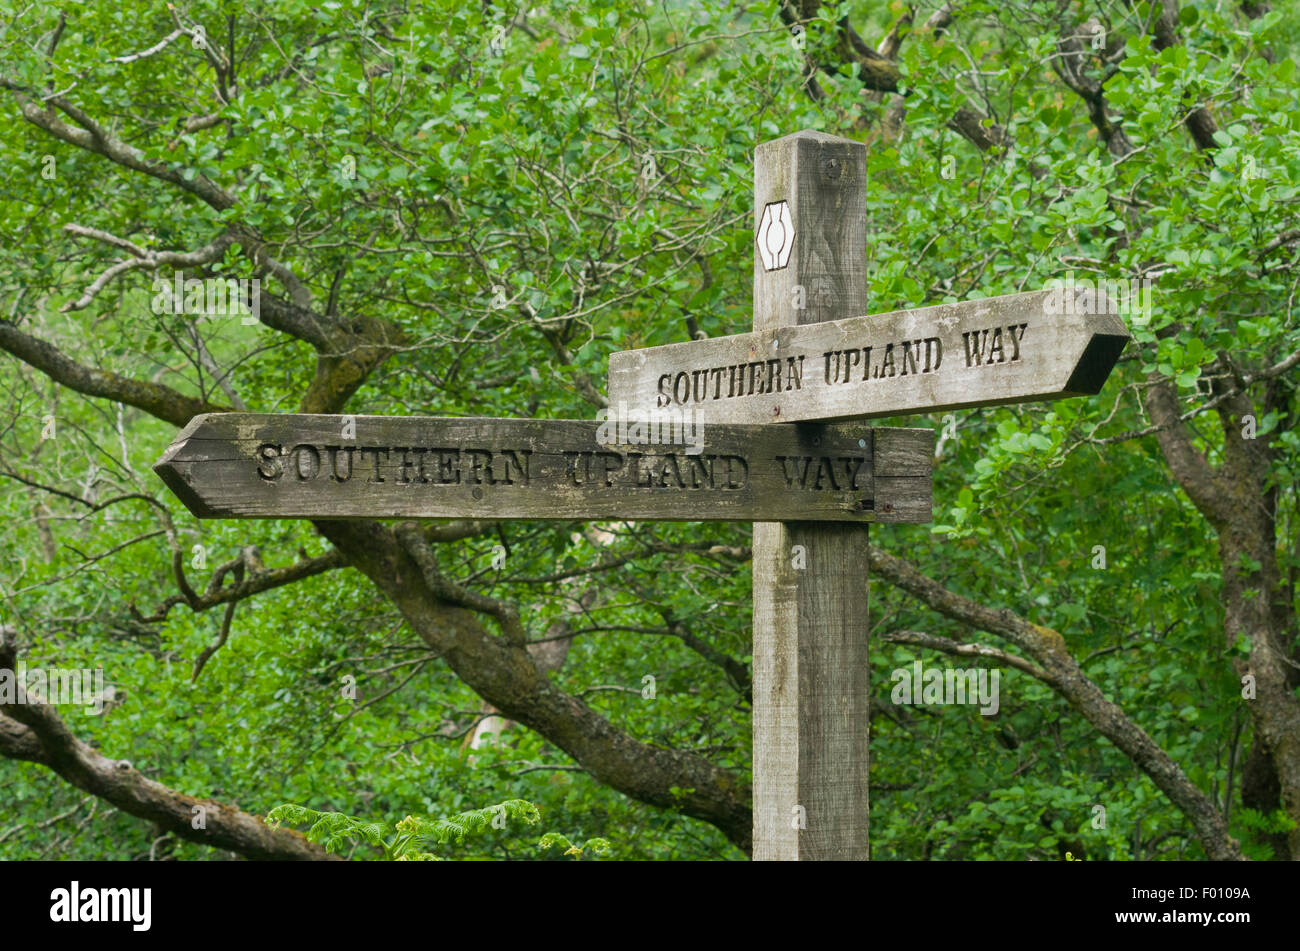 Southern Upland Way Long Distance Footpath Stock Photo